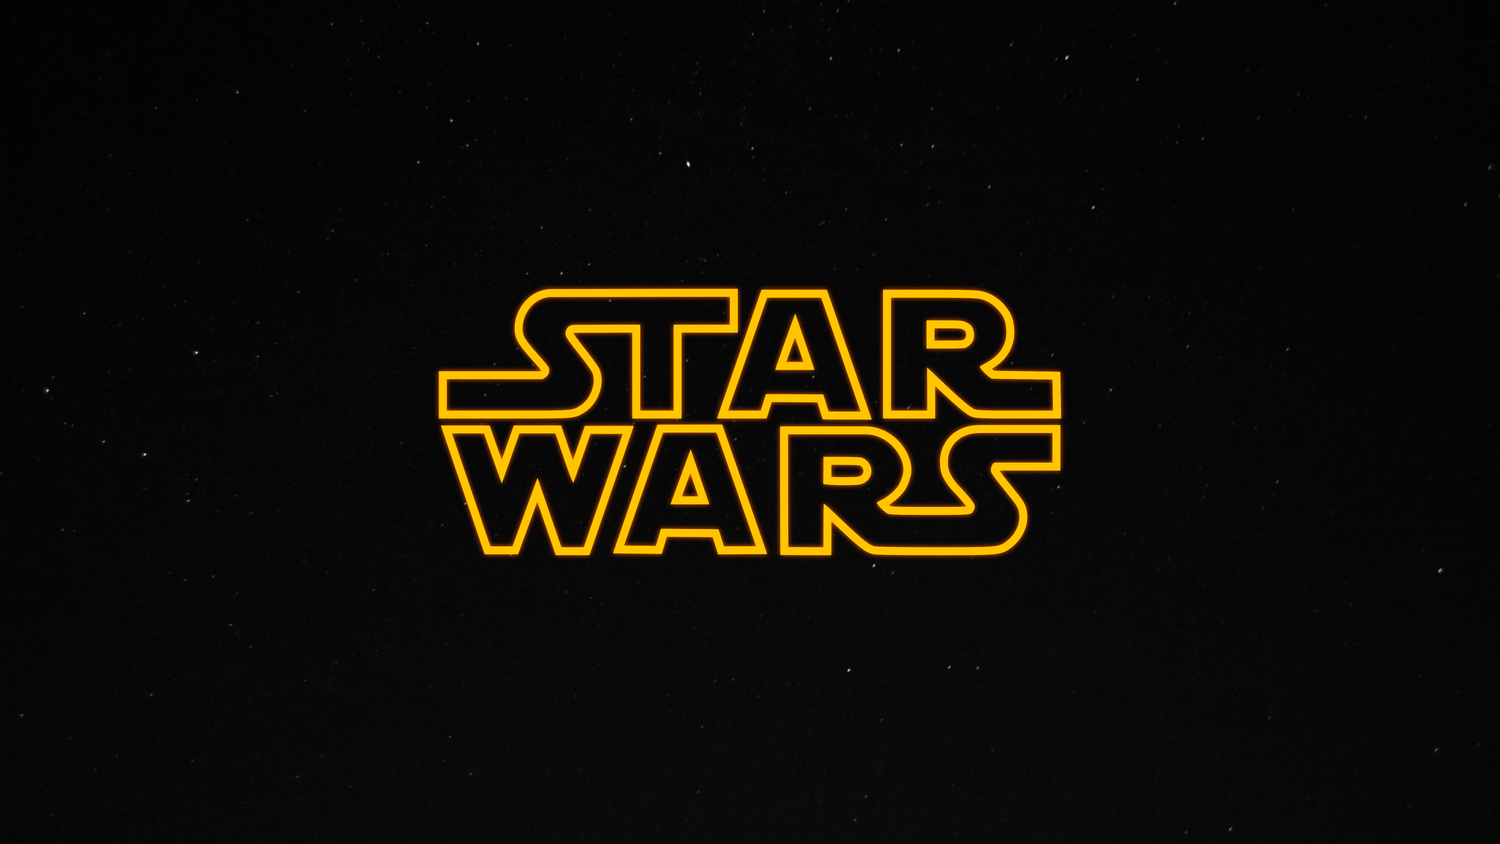 Free Star Wars opening crawl After Effects template